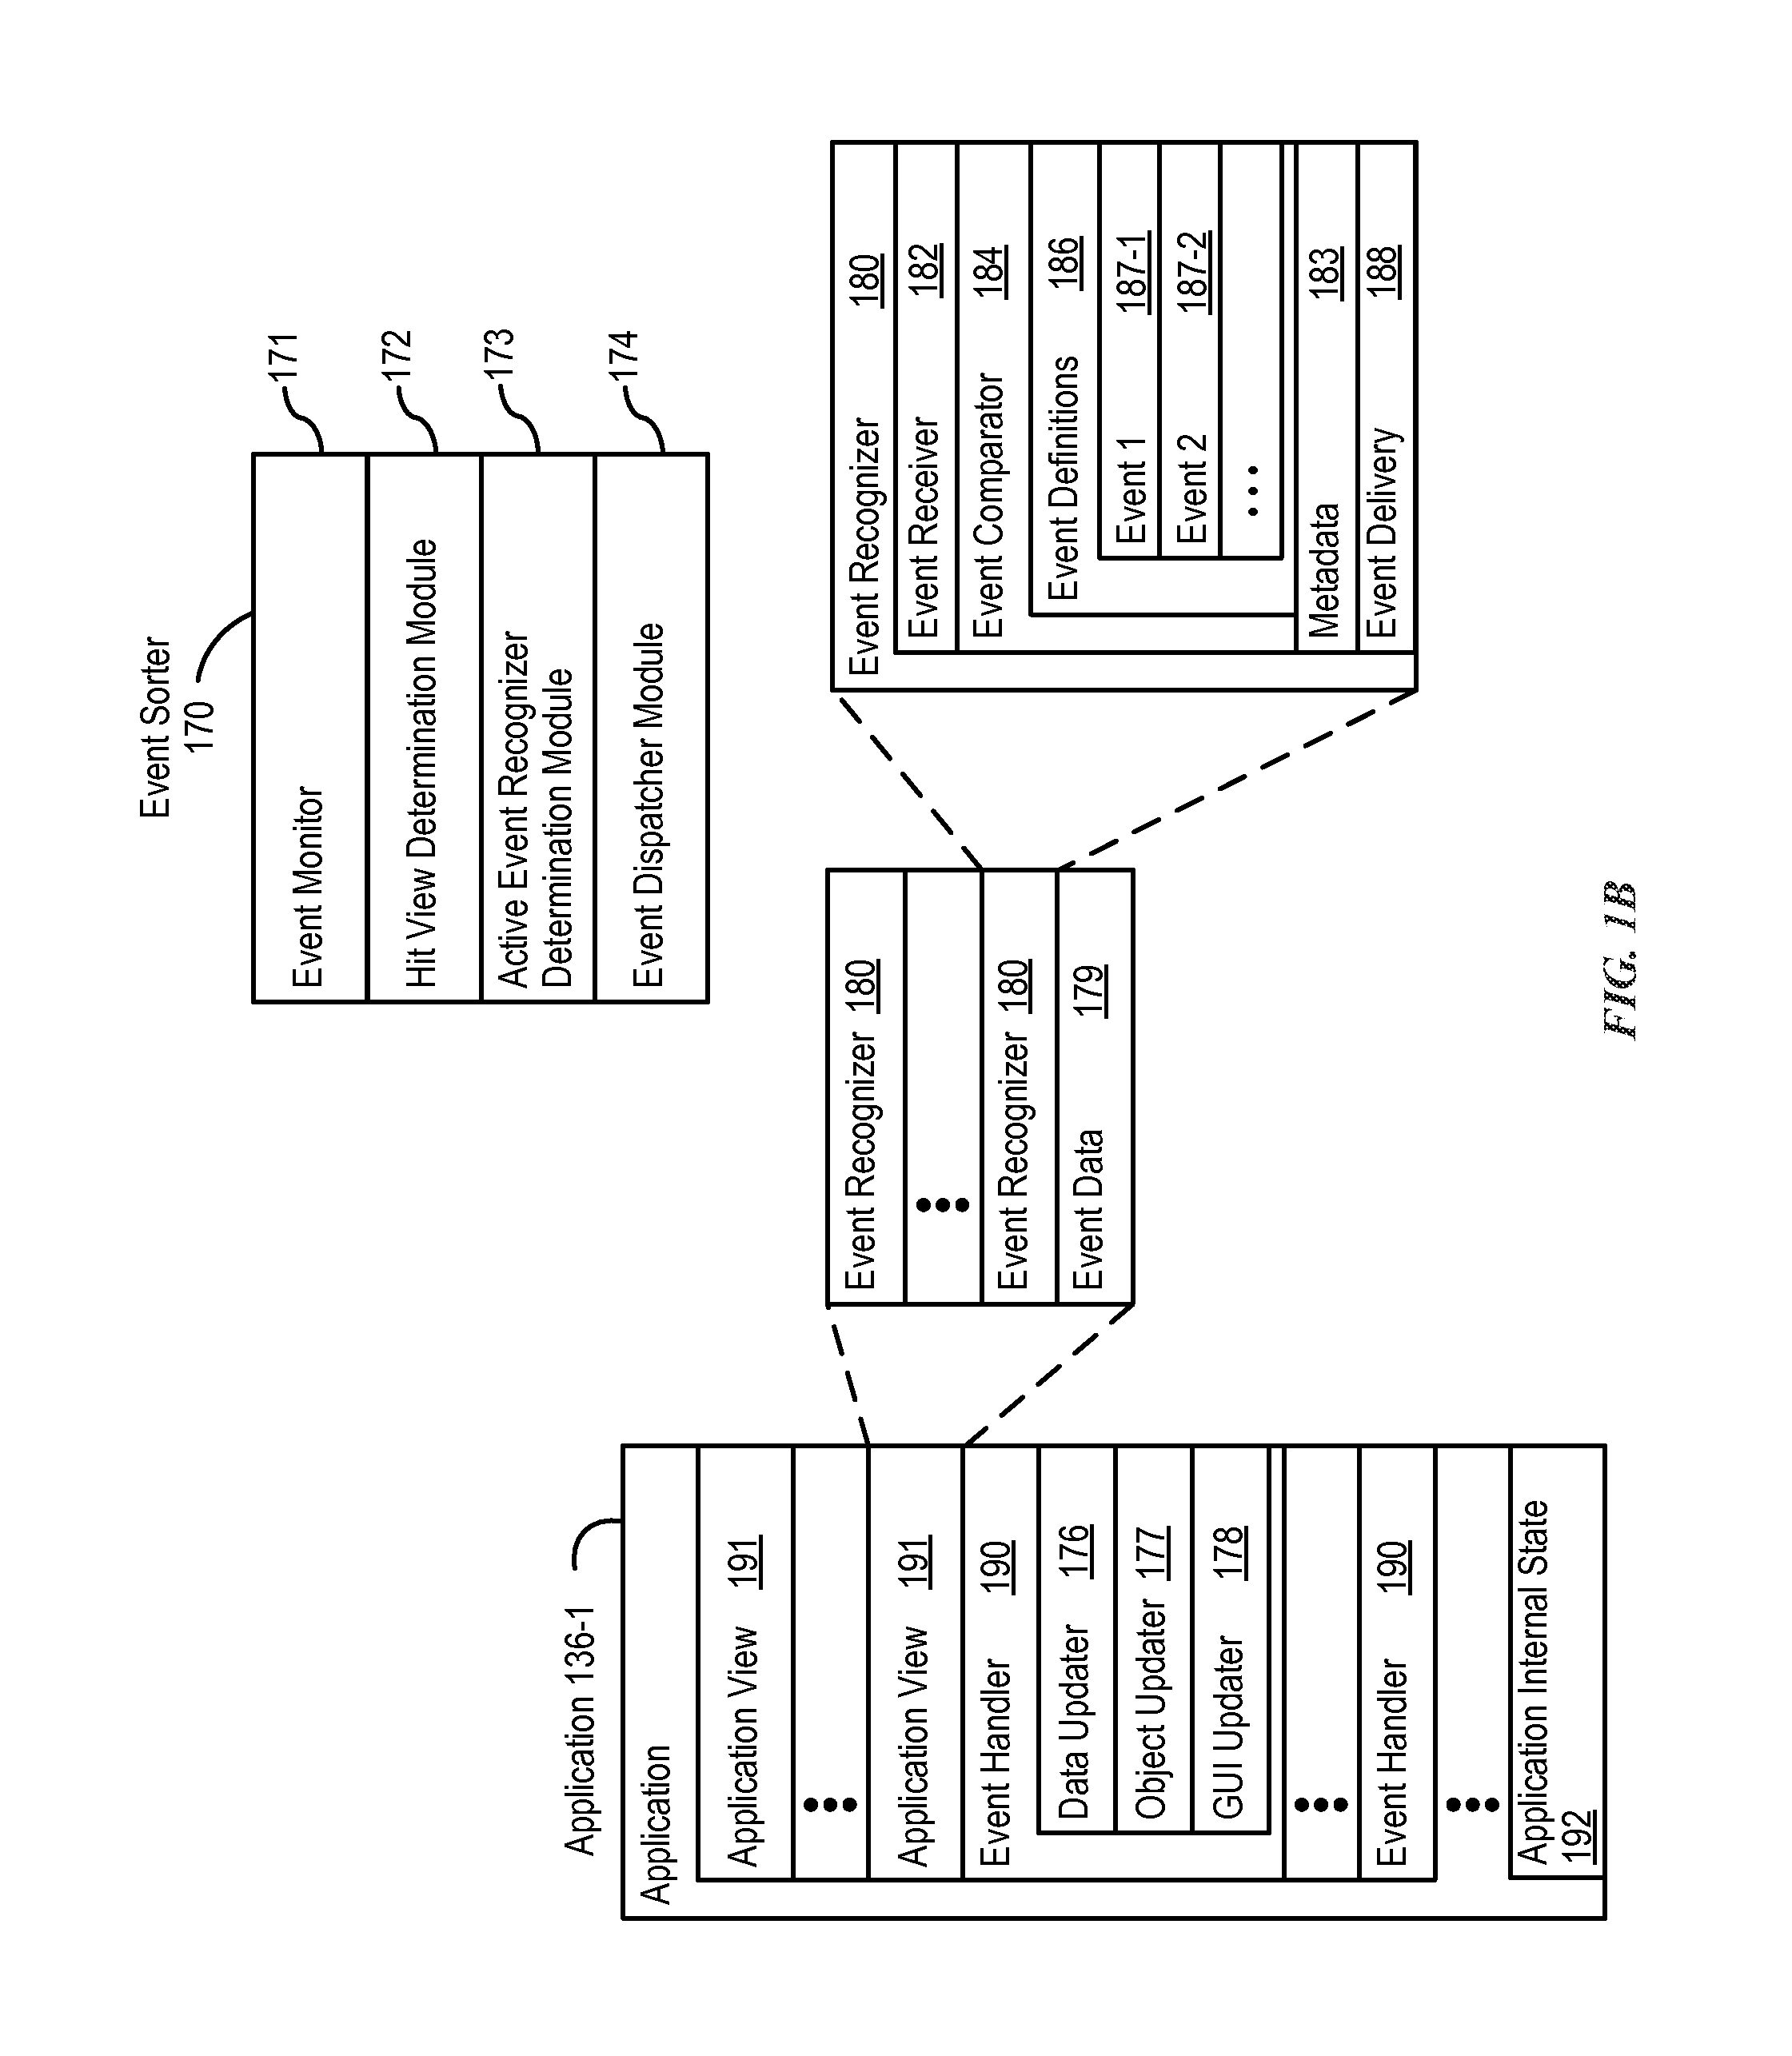 User interface for loyalty accounts and private label accounts for a wearable device